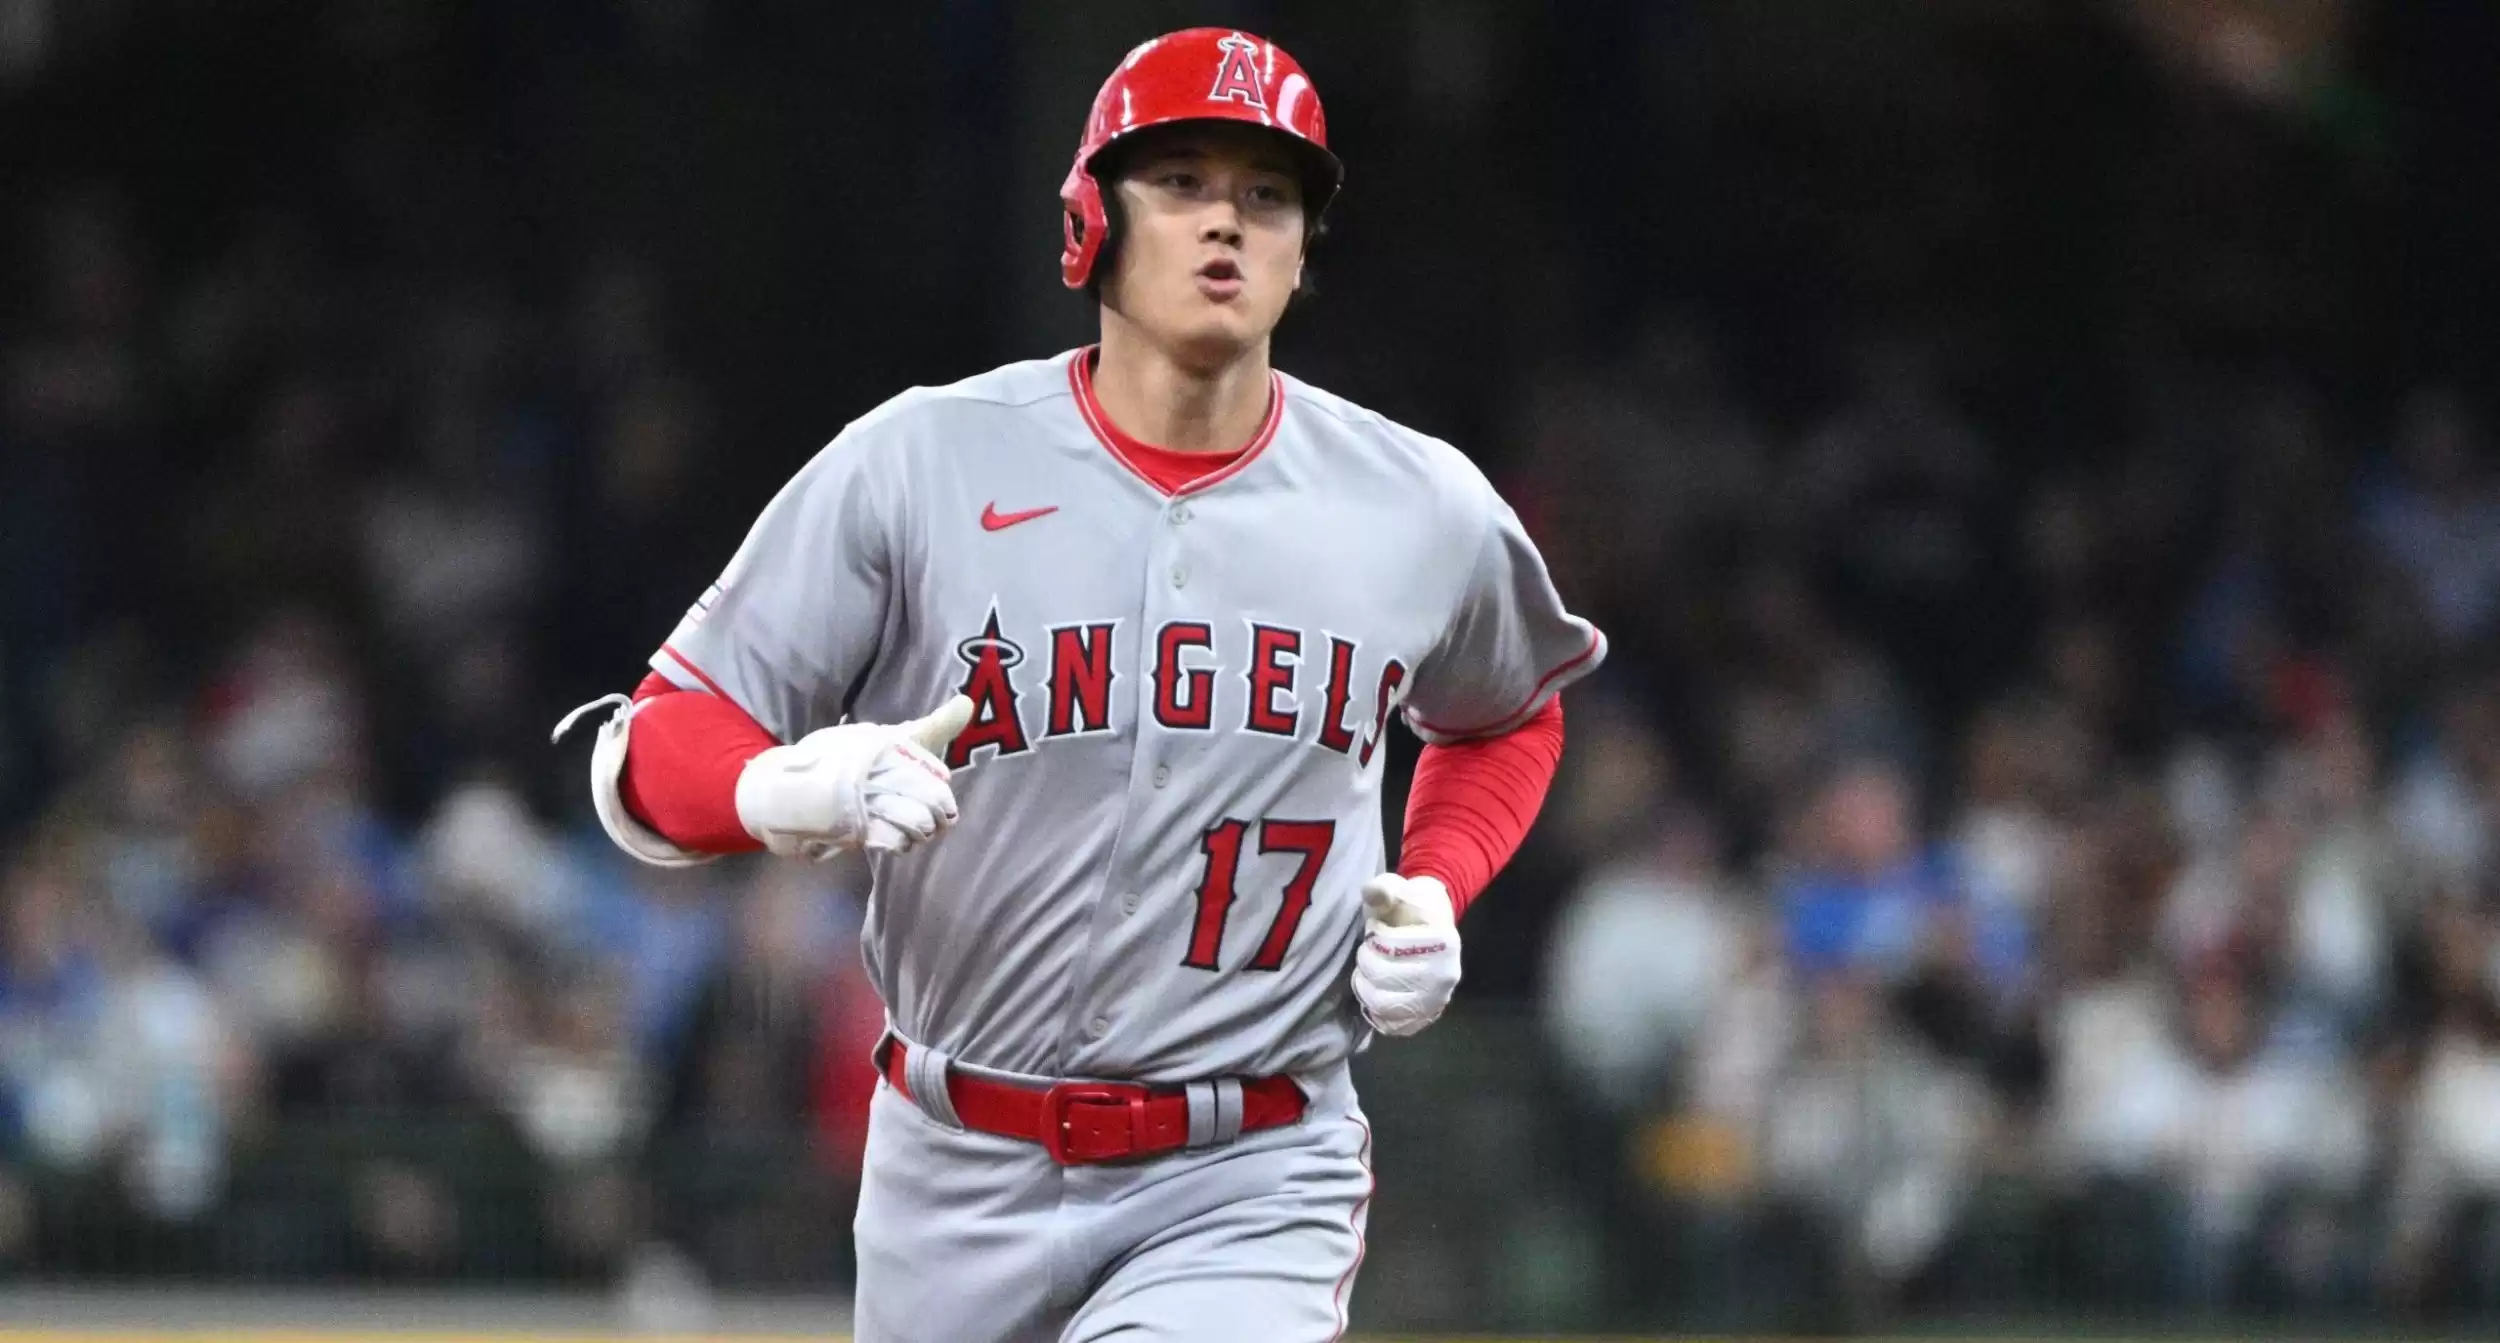 Shohei Ohtani shares thoughts on potential participation in HR Derby